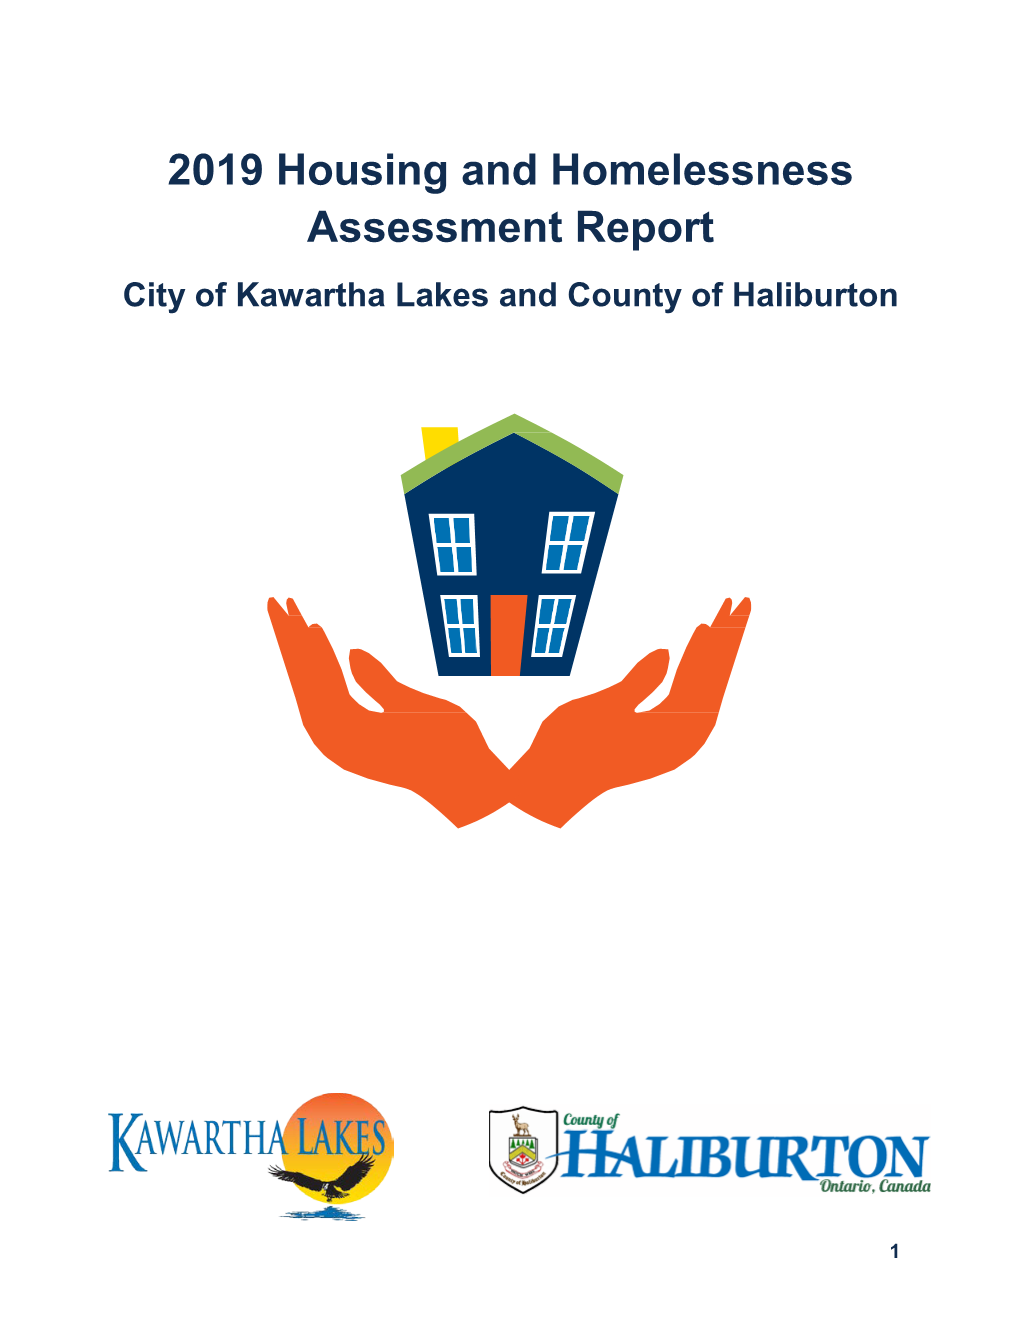 2019 Housing and Homelessness Assessment Report City of Kawartha Lakes and County of Haliburton